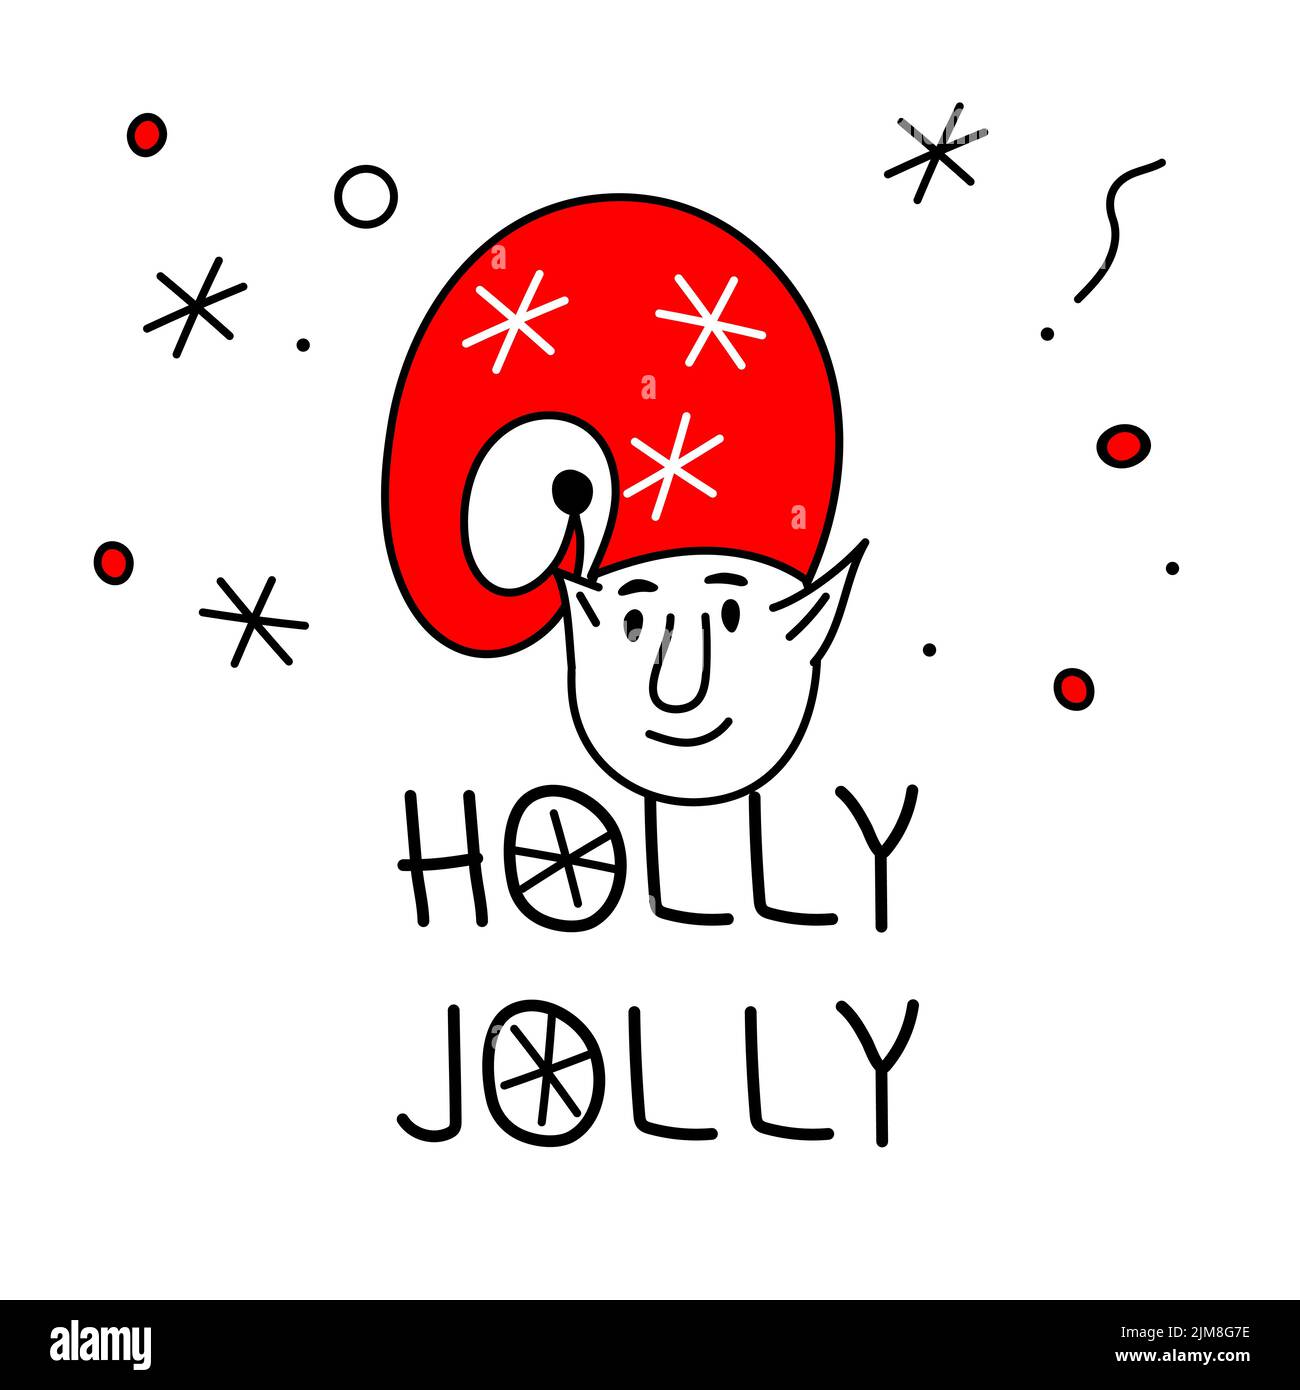 Merry Christmas avatars head elf or gnome and lettering HOLLY LOLLY. The xmas black and red vector illustration in doodle art style. Trendy hand drawn Stock Vector